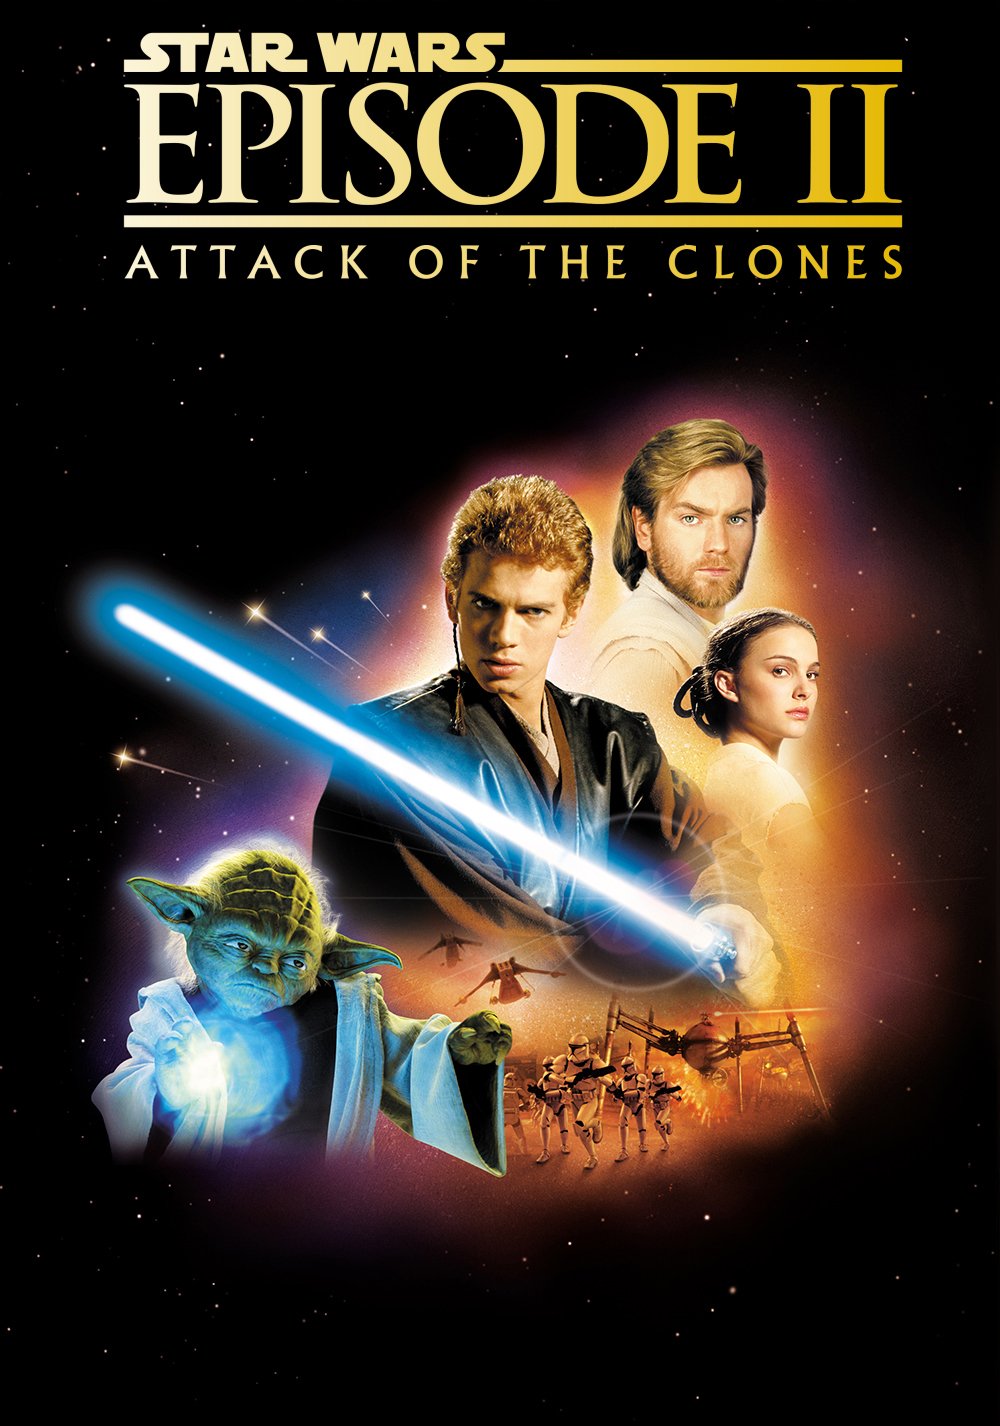 Star Wars Episode II: Attack Of The Clones Movie Poster - ID: 124911